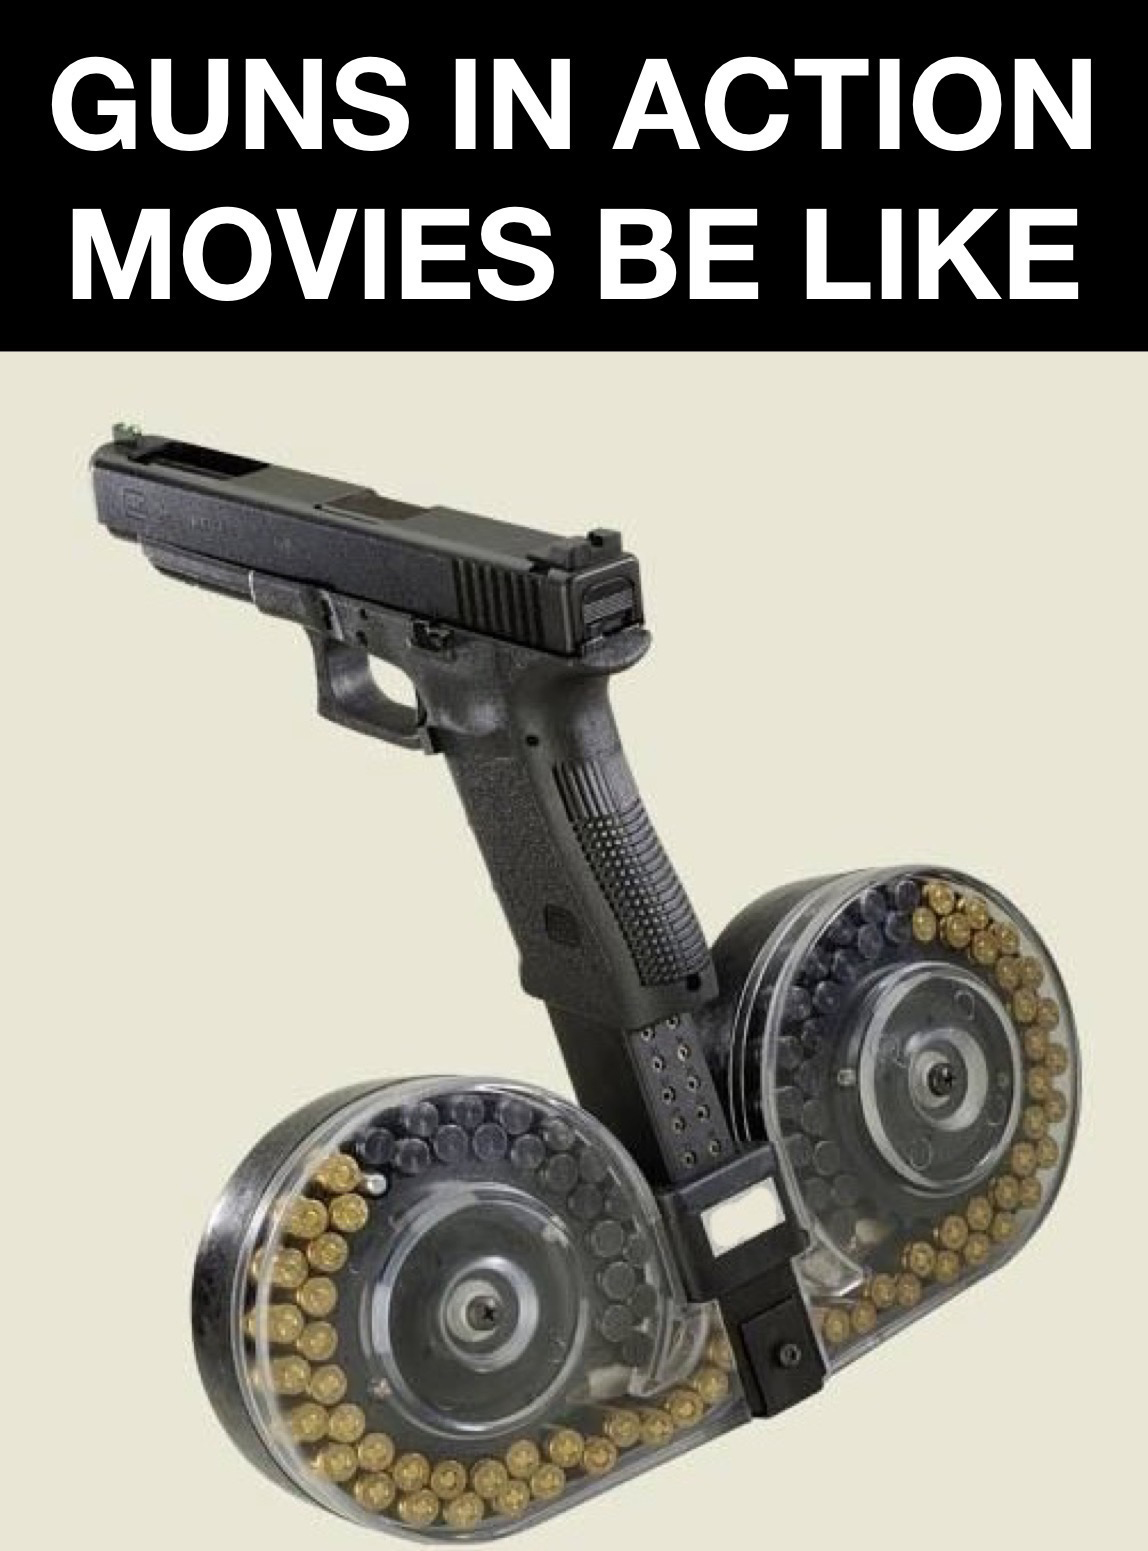 funny memes - glock and balls - Guns In Action Movies Be 50000 02.0